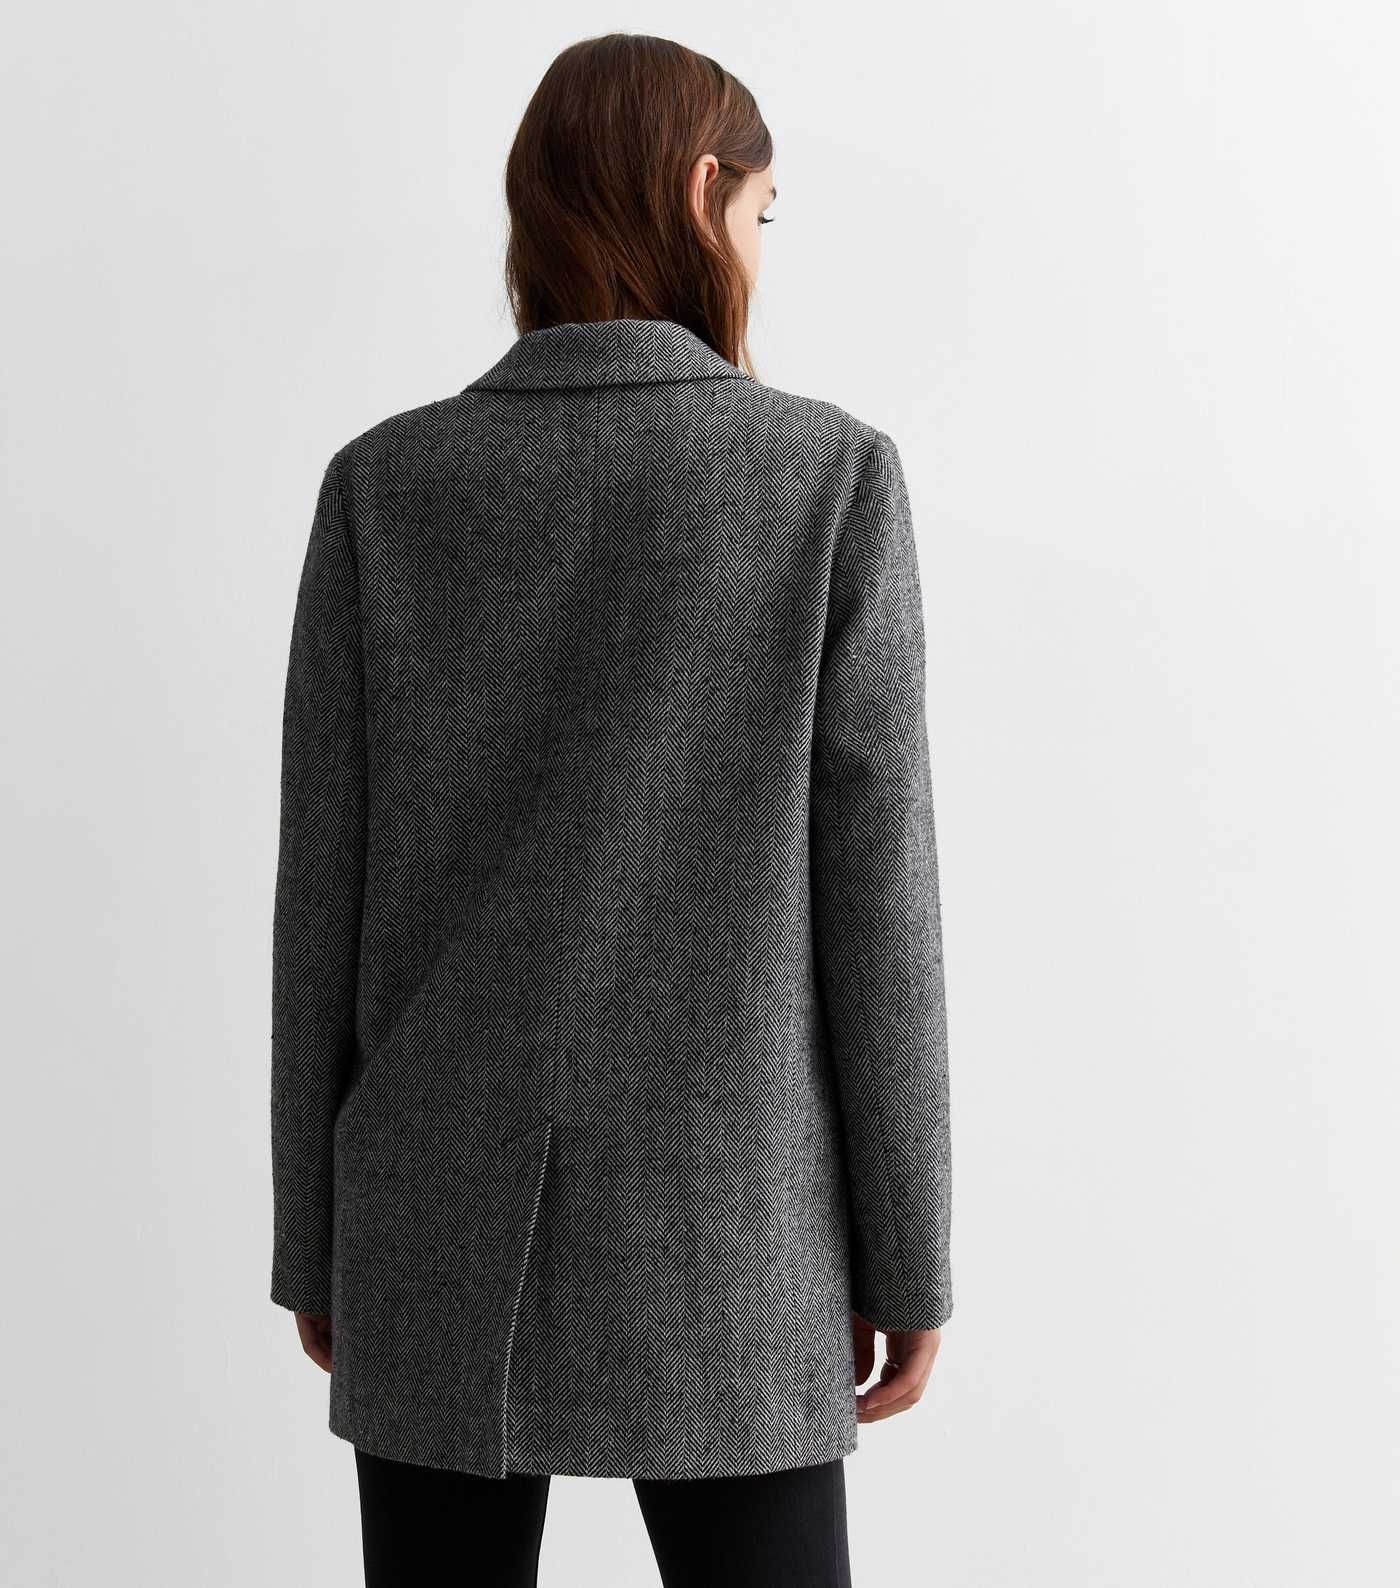 Grey Long Sleeve Formal Blazer
						
						Add to Saved Items
						Remove from Saved Items | New Look (UK)